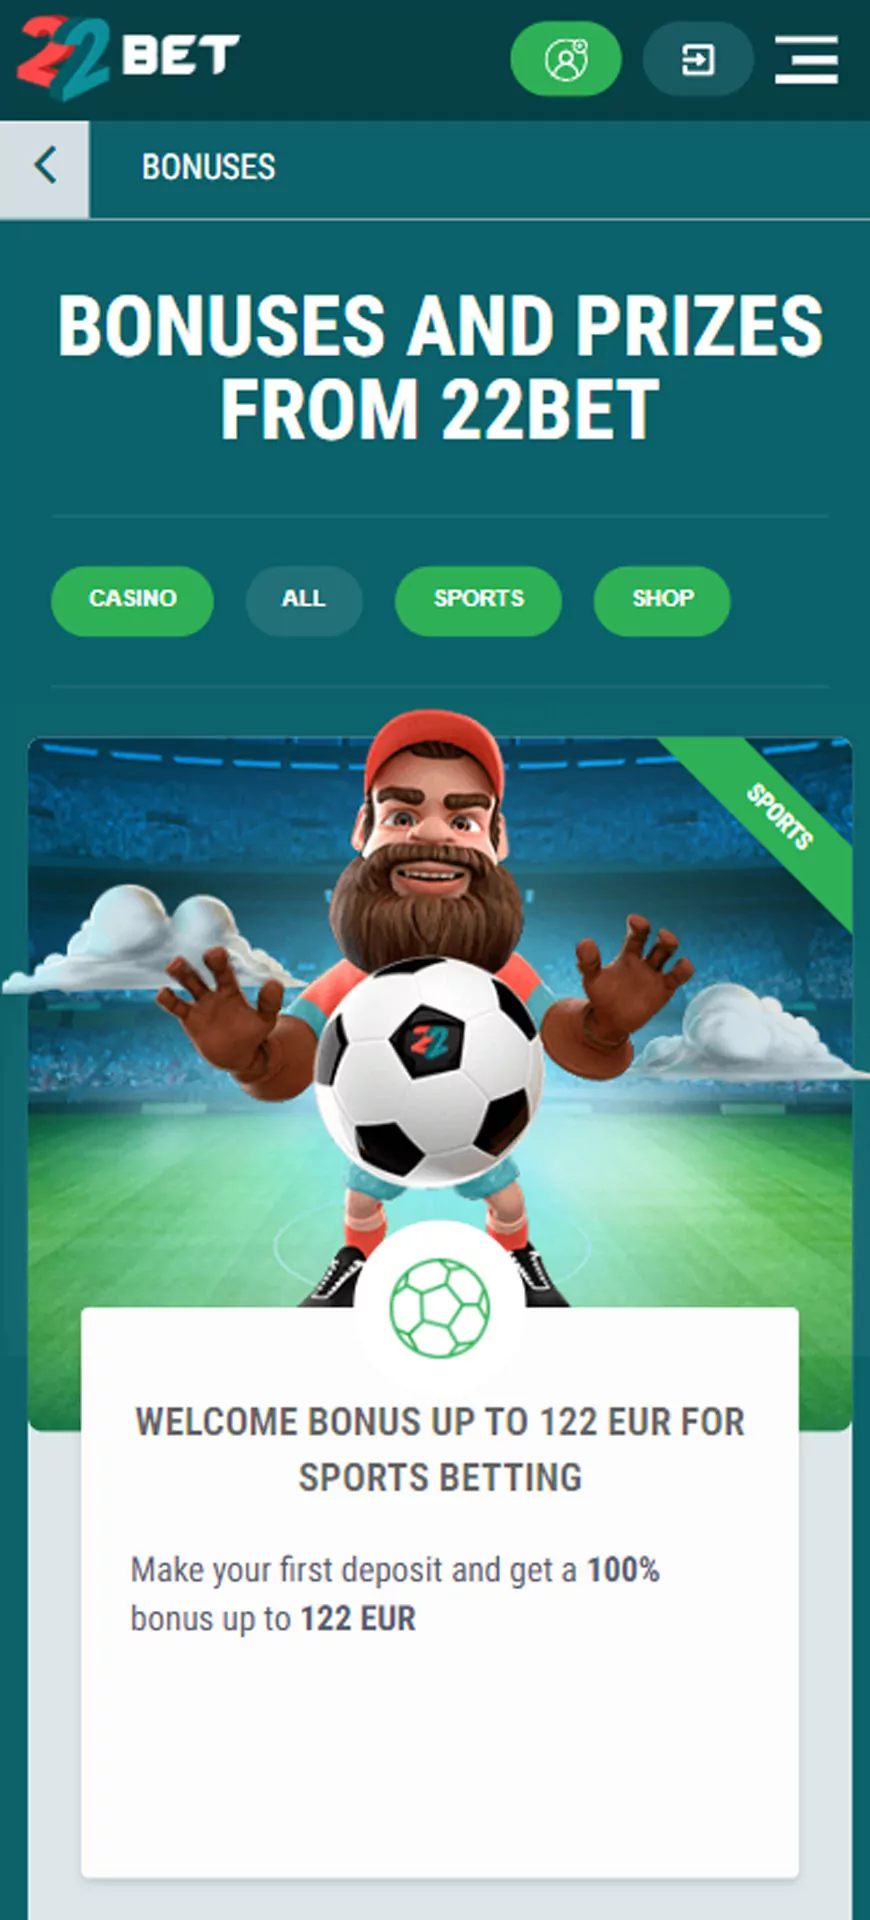 Use 22bet bonuses and promotions for best betting expirience.